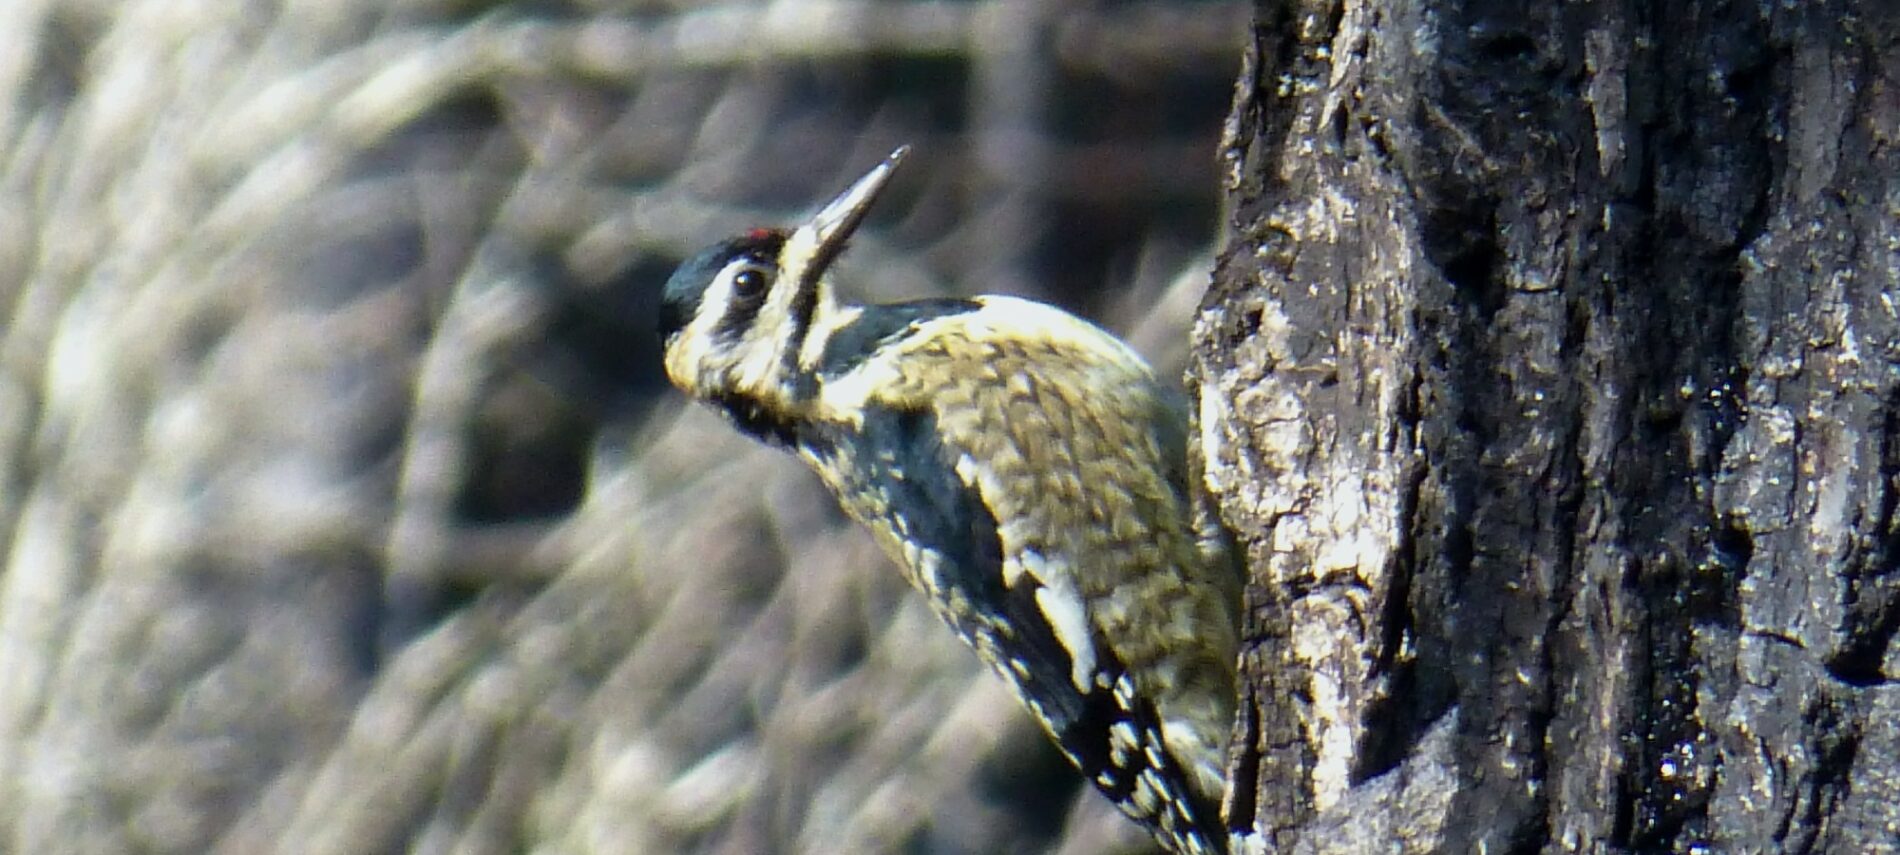 The Yellow-bellied Sapsucker, a small woodpecker, perched sideways on a tree trunk